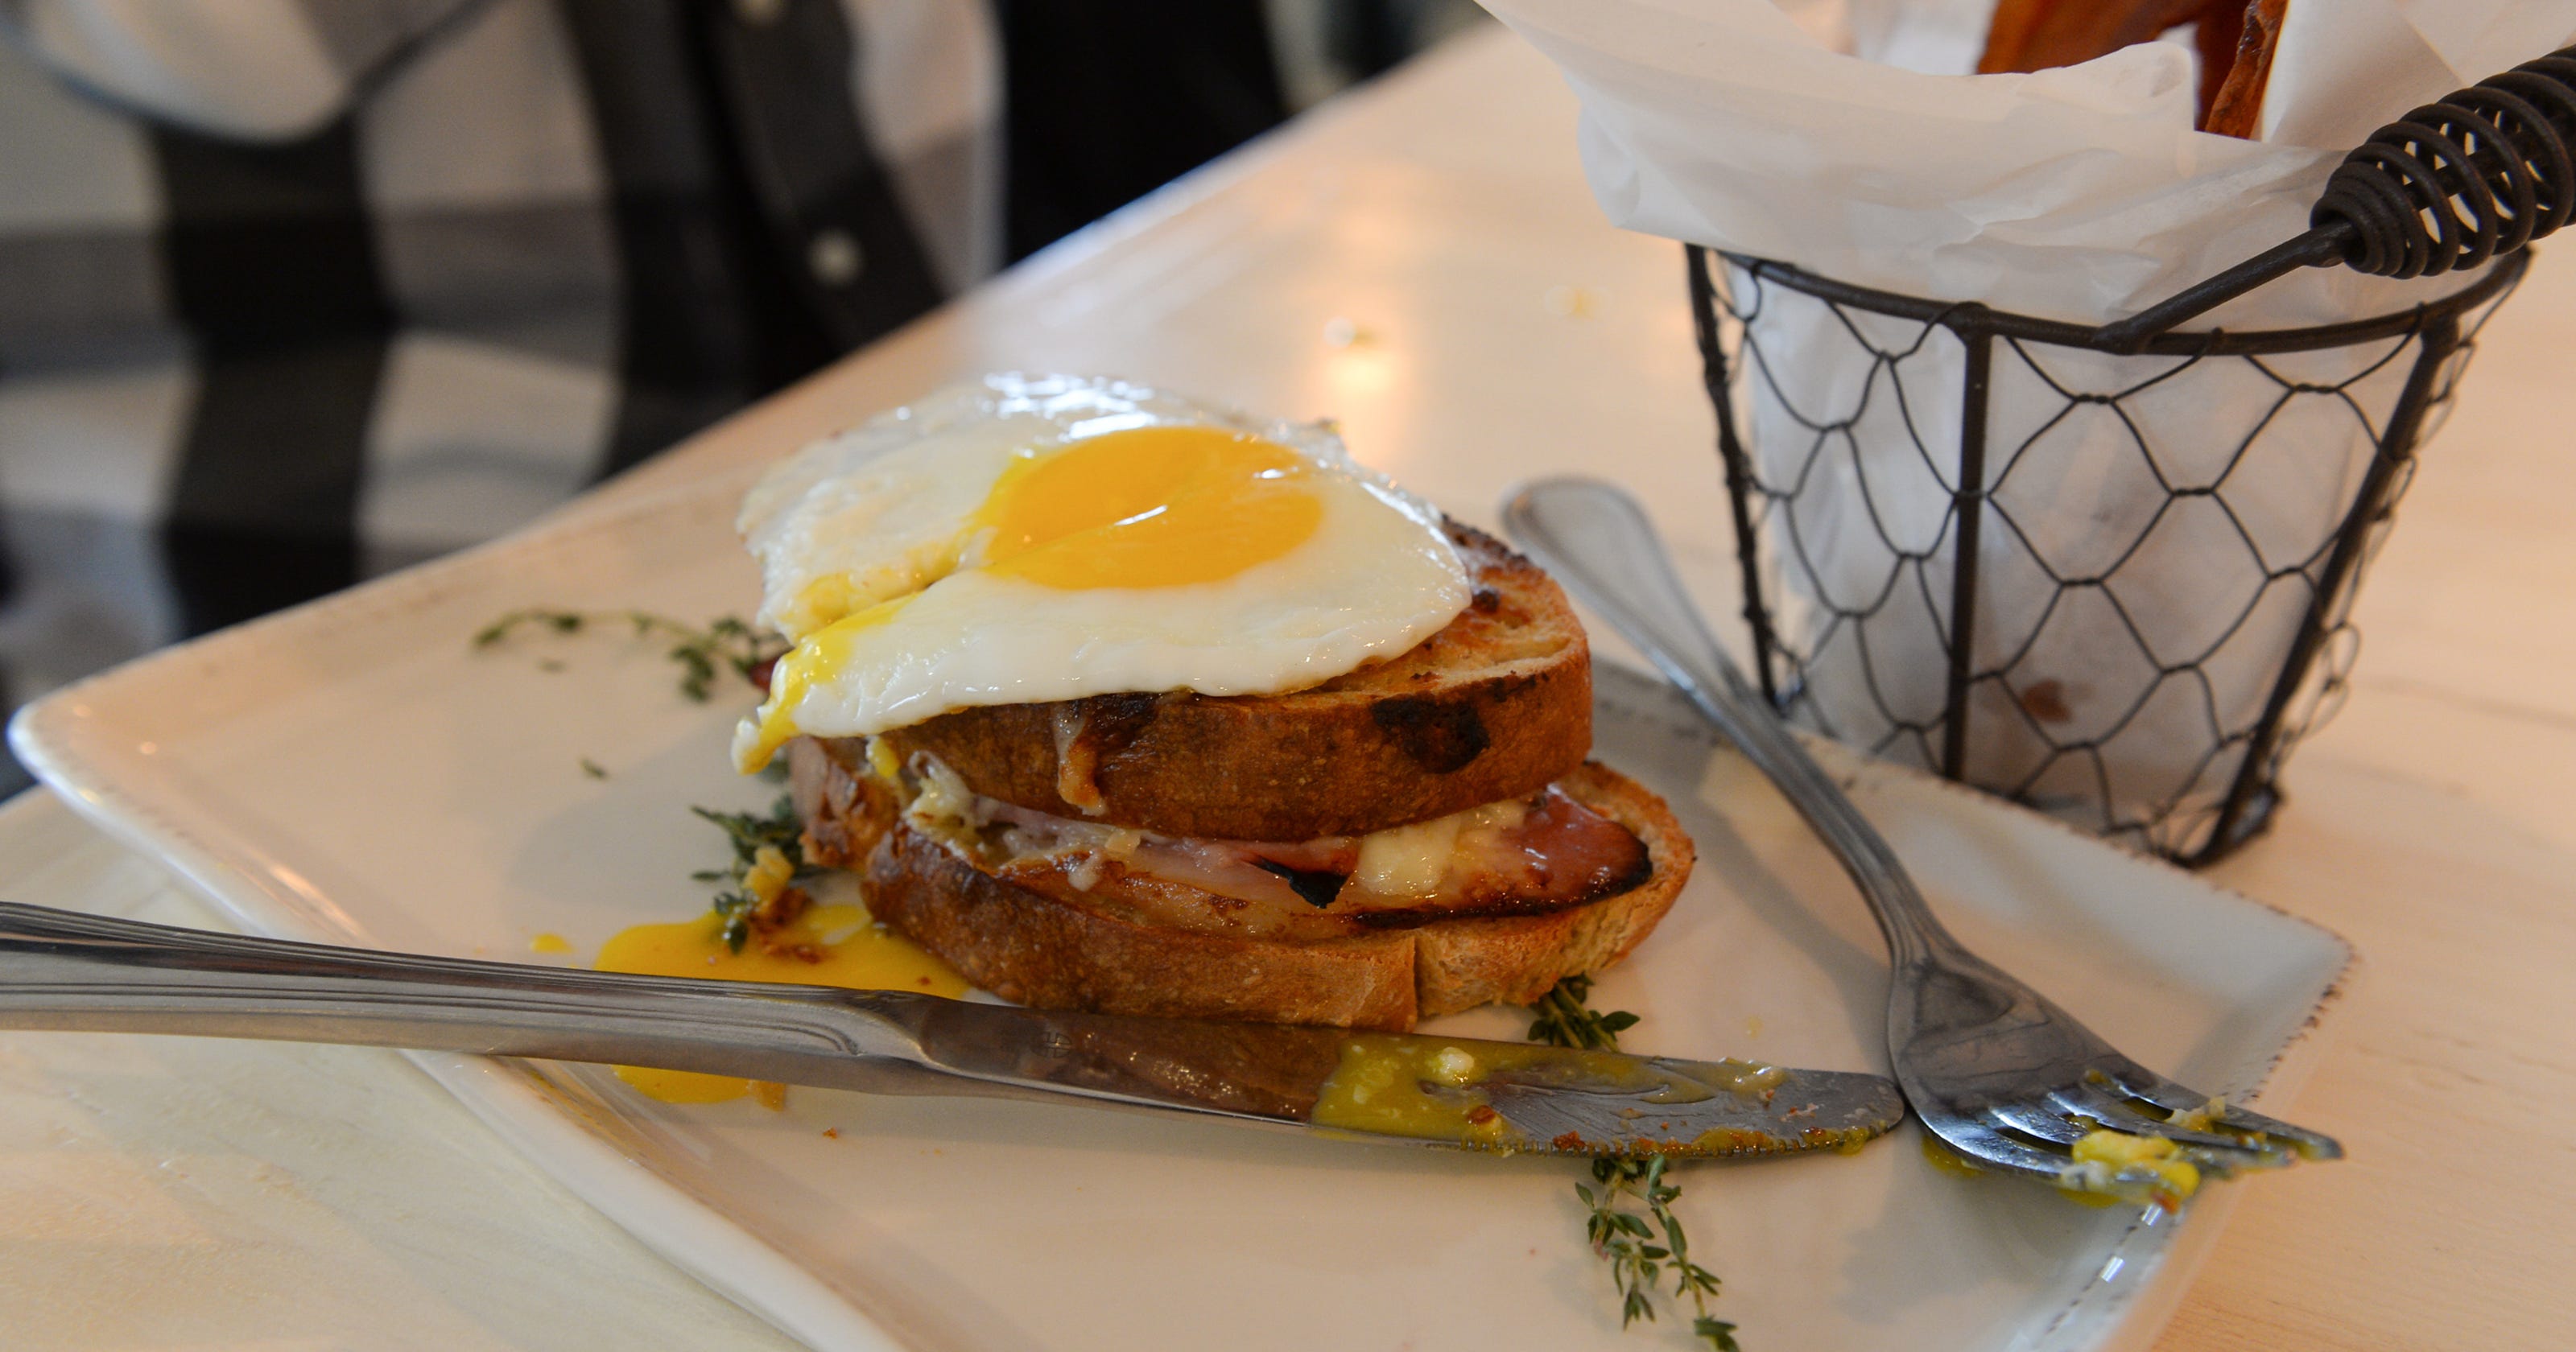 Gourmet brunch and lunch spot opens in Rehoboth Beach